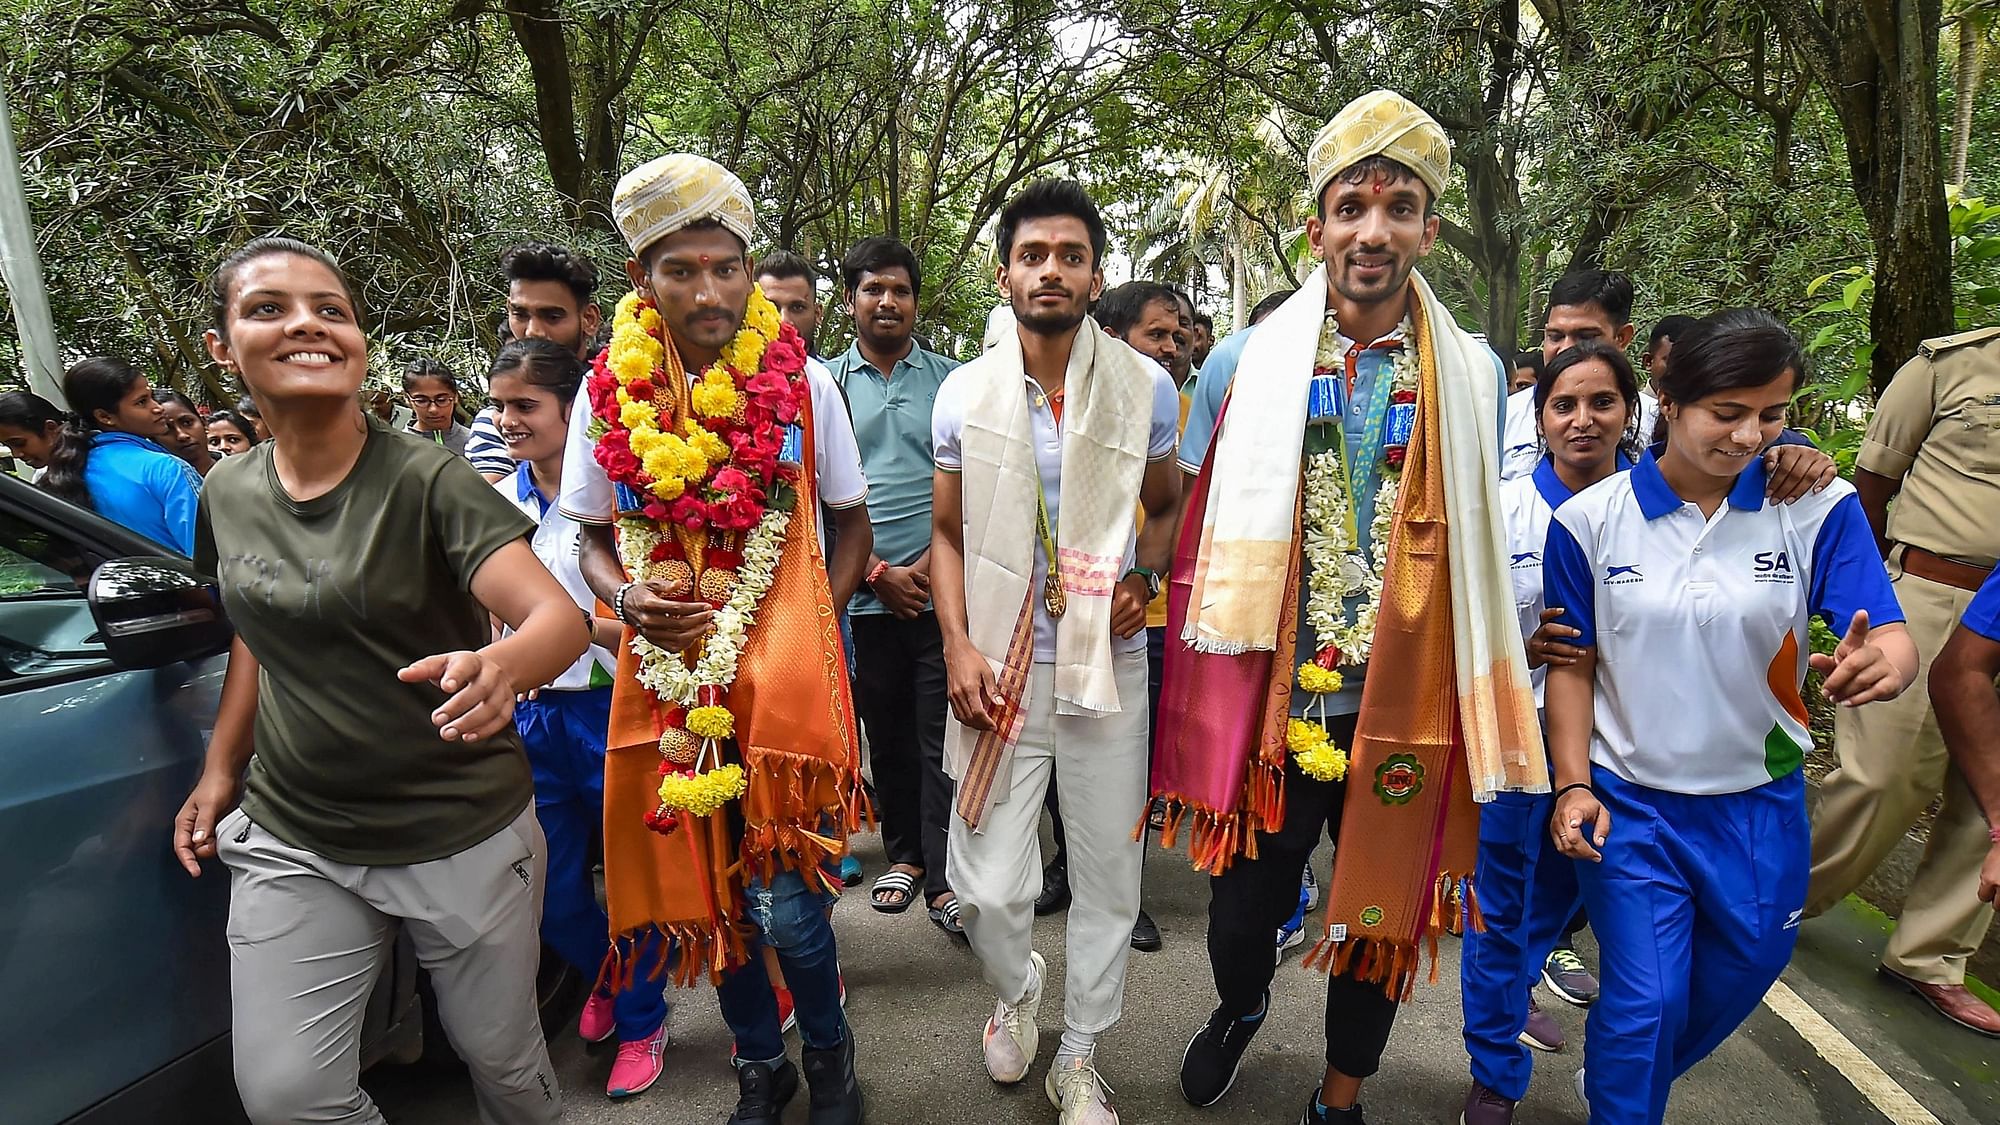 <div class="paragraphs"><p>CWG 2022 triple jump gold medallist Eldhose Paul (C), silver medallist Abdulla Aboobacker (R), and 3000 M steeplechase silver medal winner Avinash Sable during a welcome ceremony at SAI  in Bengaluru on Tuesday, 9 August 2022.</p></div>